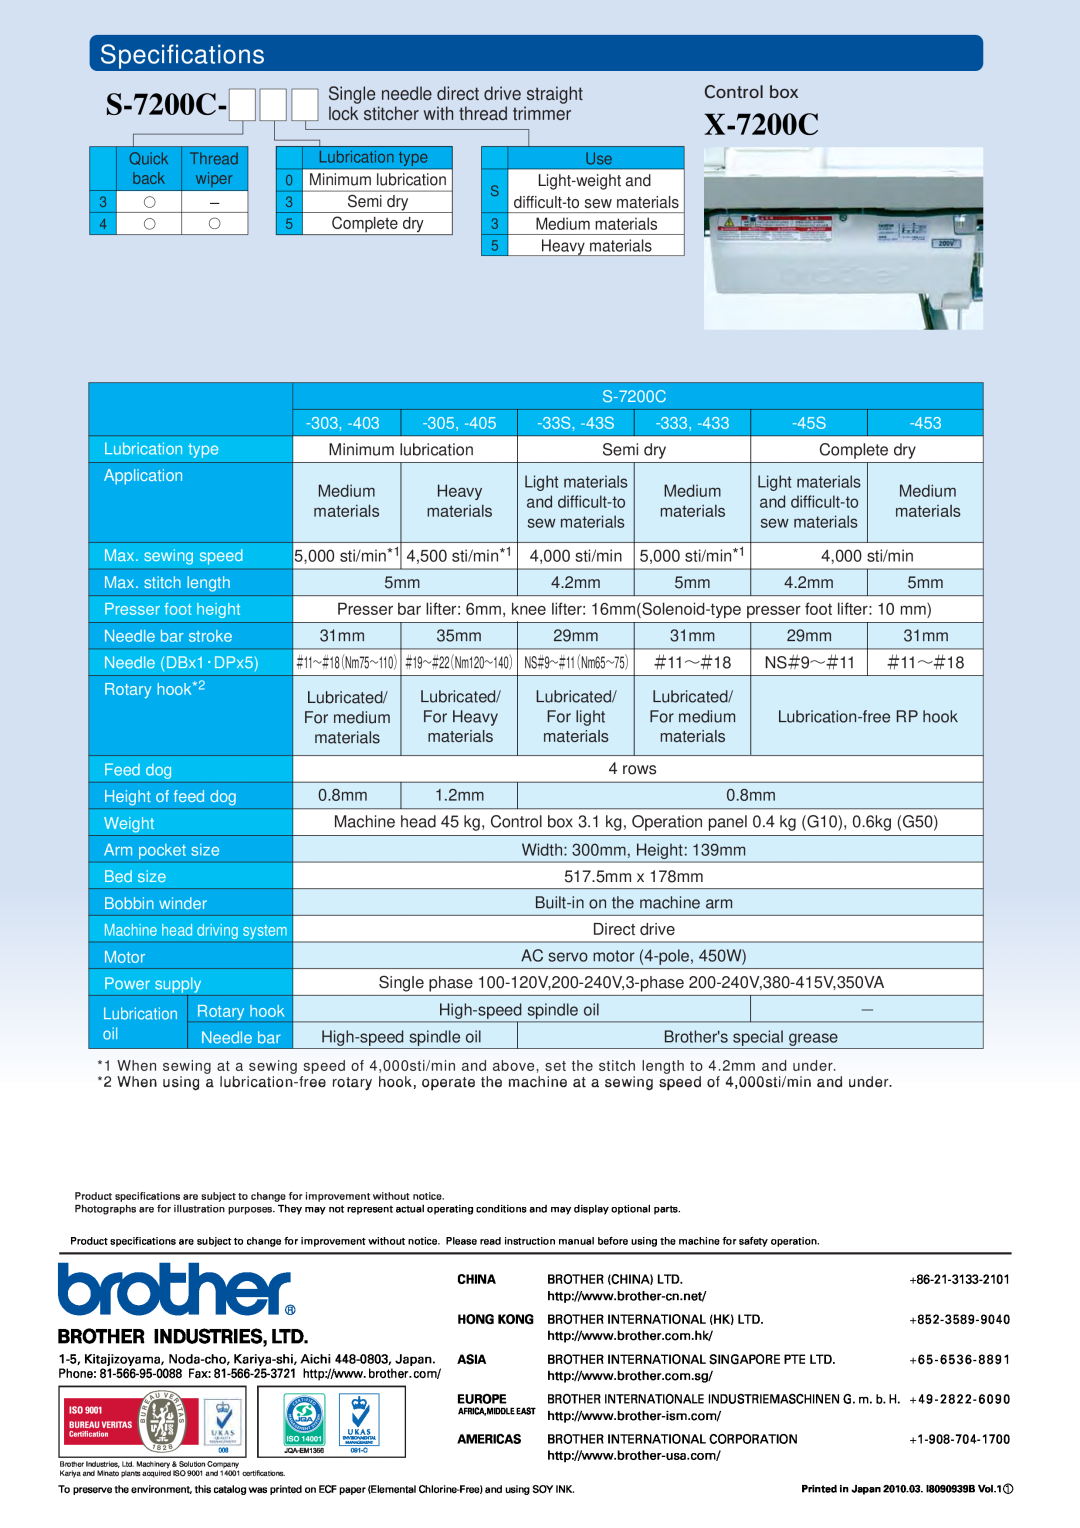 Brother S-7200C Specifications, X-7200C, Quick, Thread, Lubrication type, back, wiper, Semi dry, Heavy materials, 31mm 